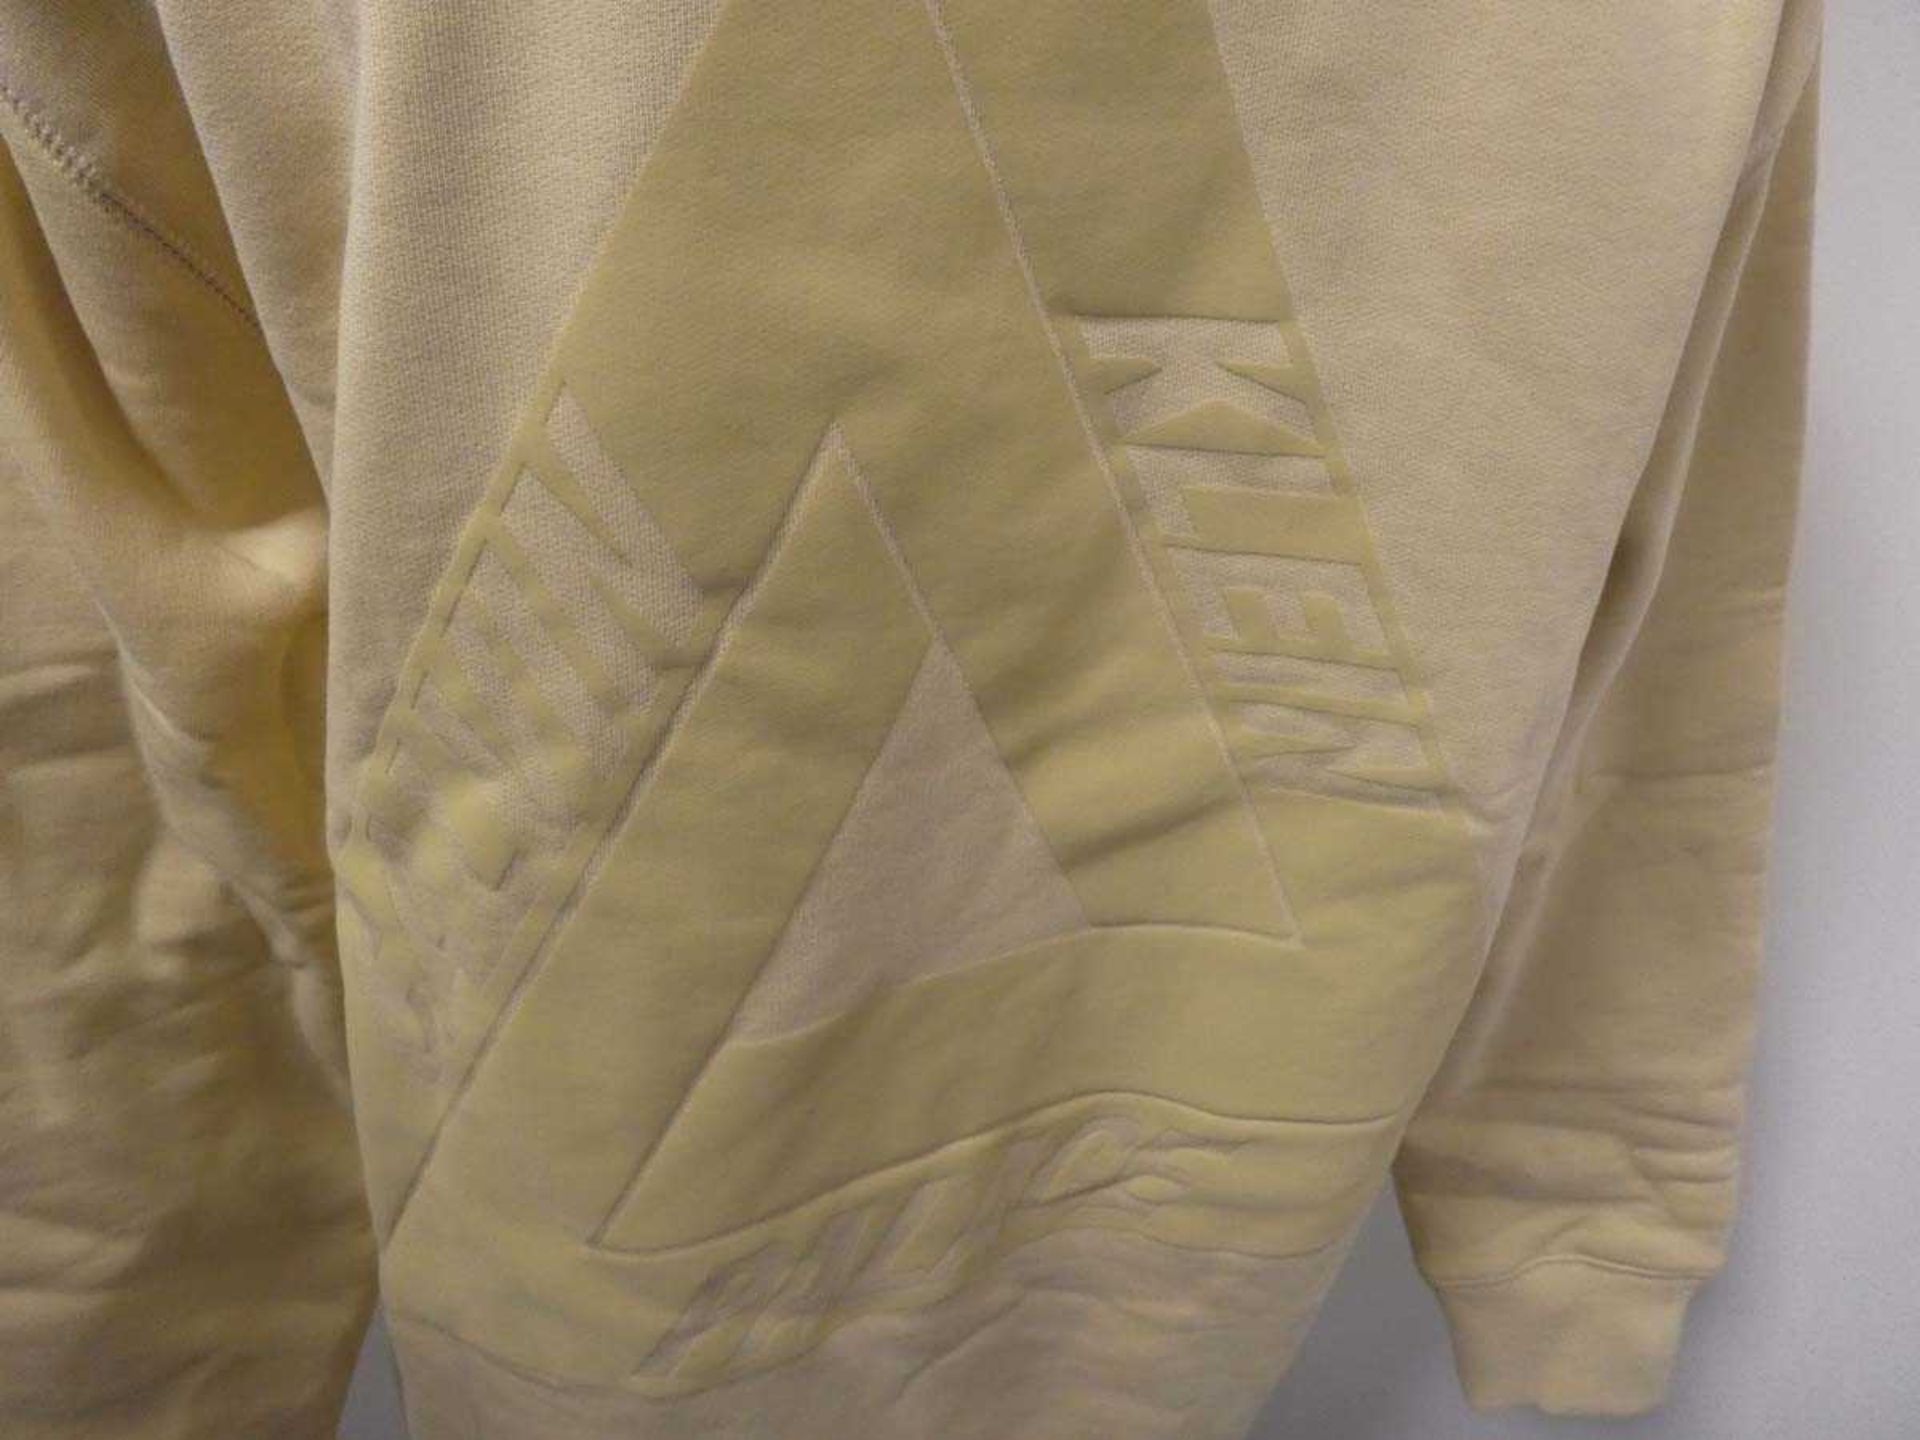 +VAT Calvin Klein x Palace Tri-Ferg hoodie in wheat, size small - Image 4 of 4